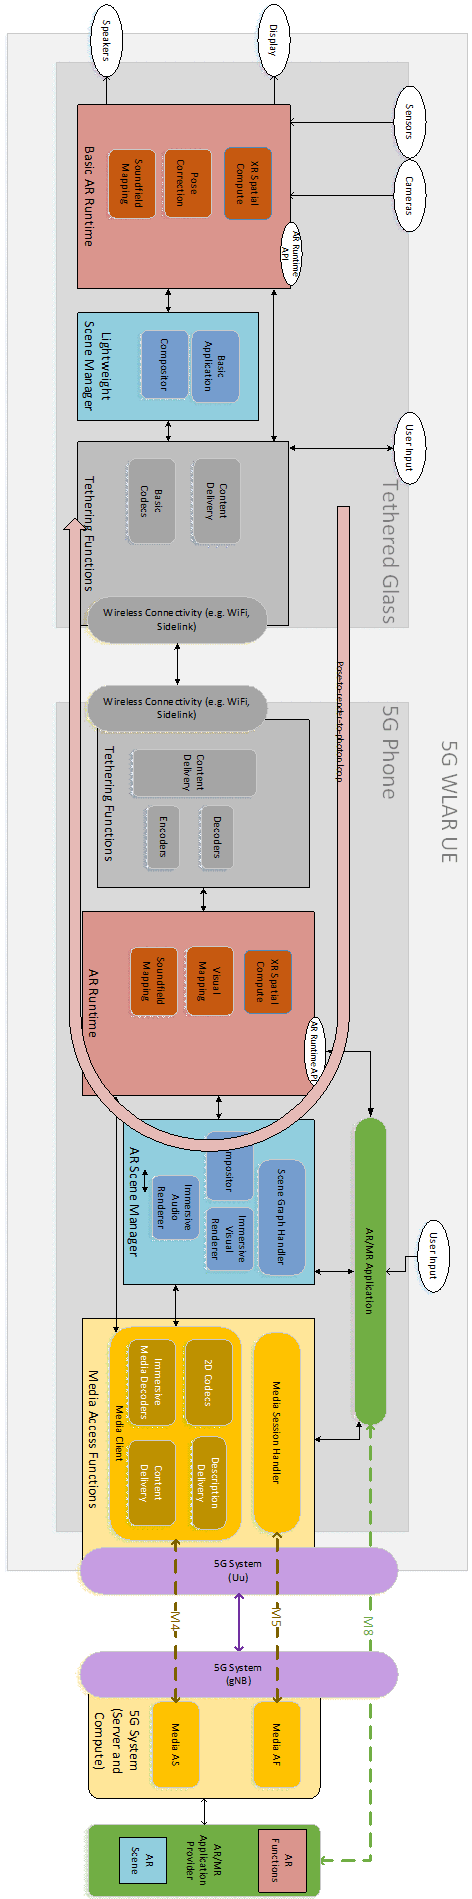 Copy of original 3GPP image for 3GPP TS 26.998, Fig. 4.2.2.4-1: Functional structure for Type 3a: 5G Split Rendering WireLess Tethered AR UE